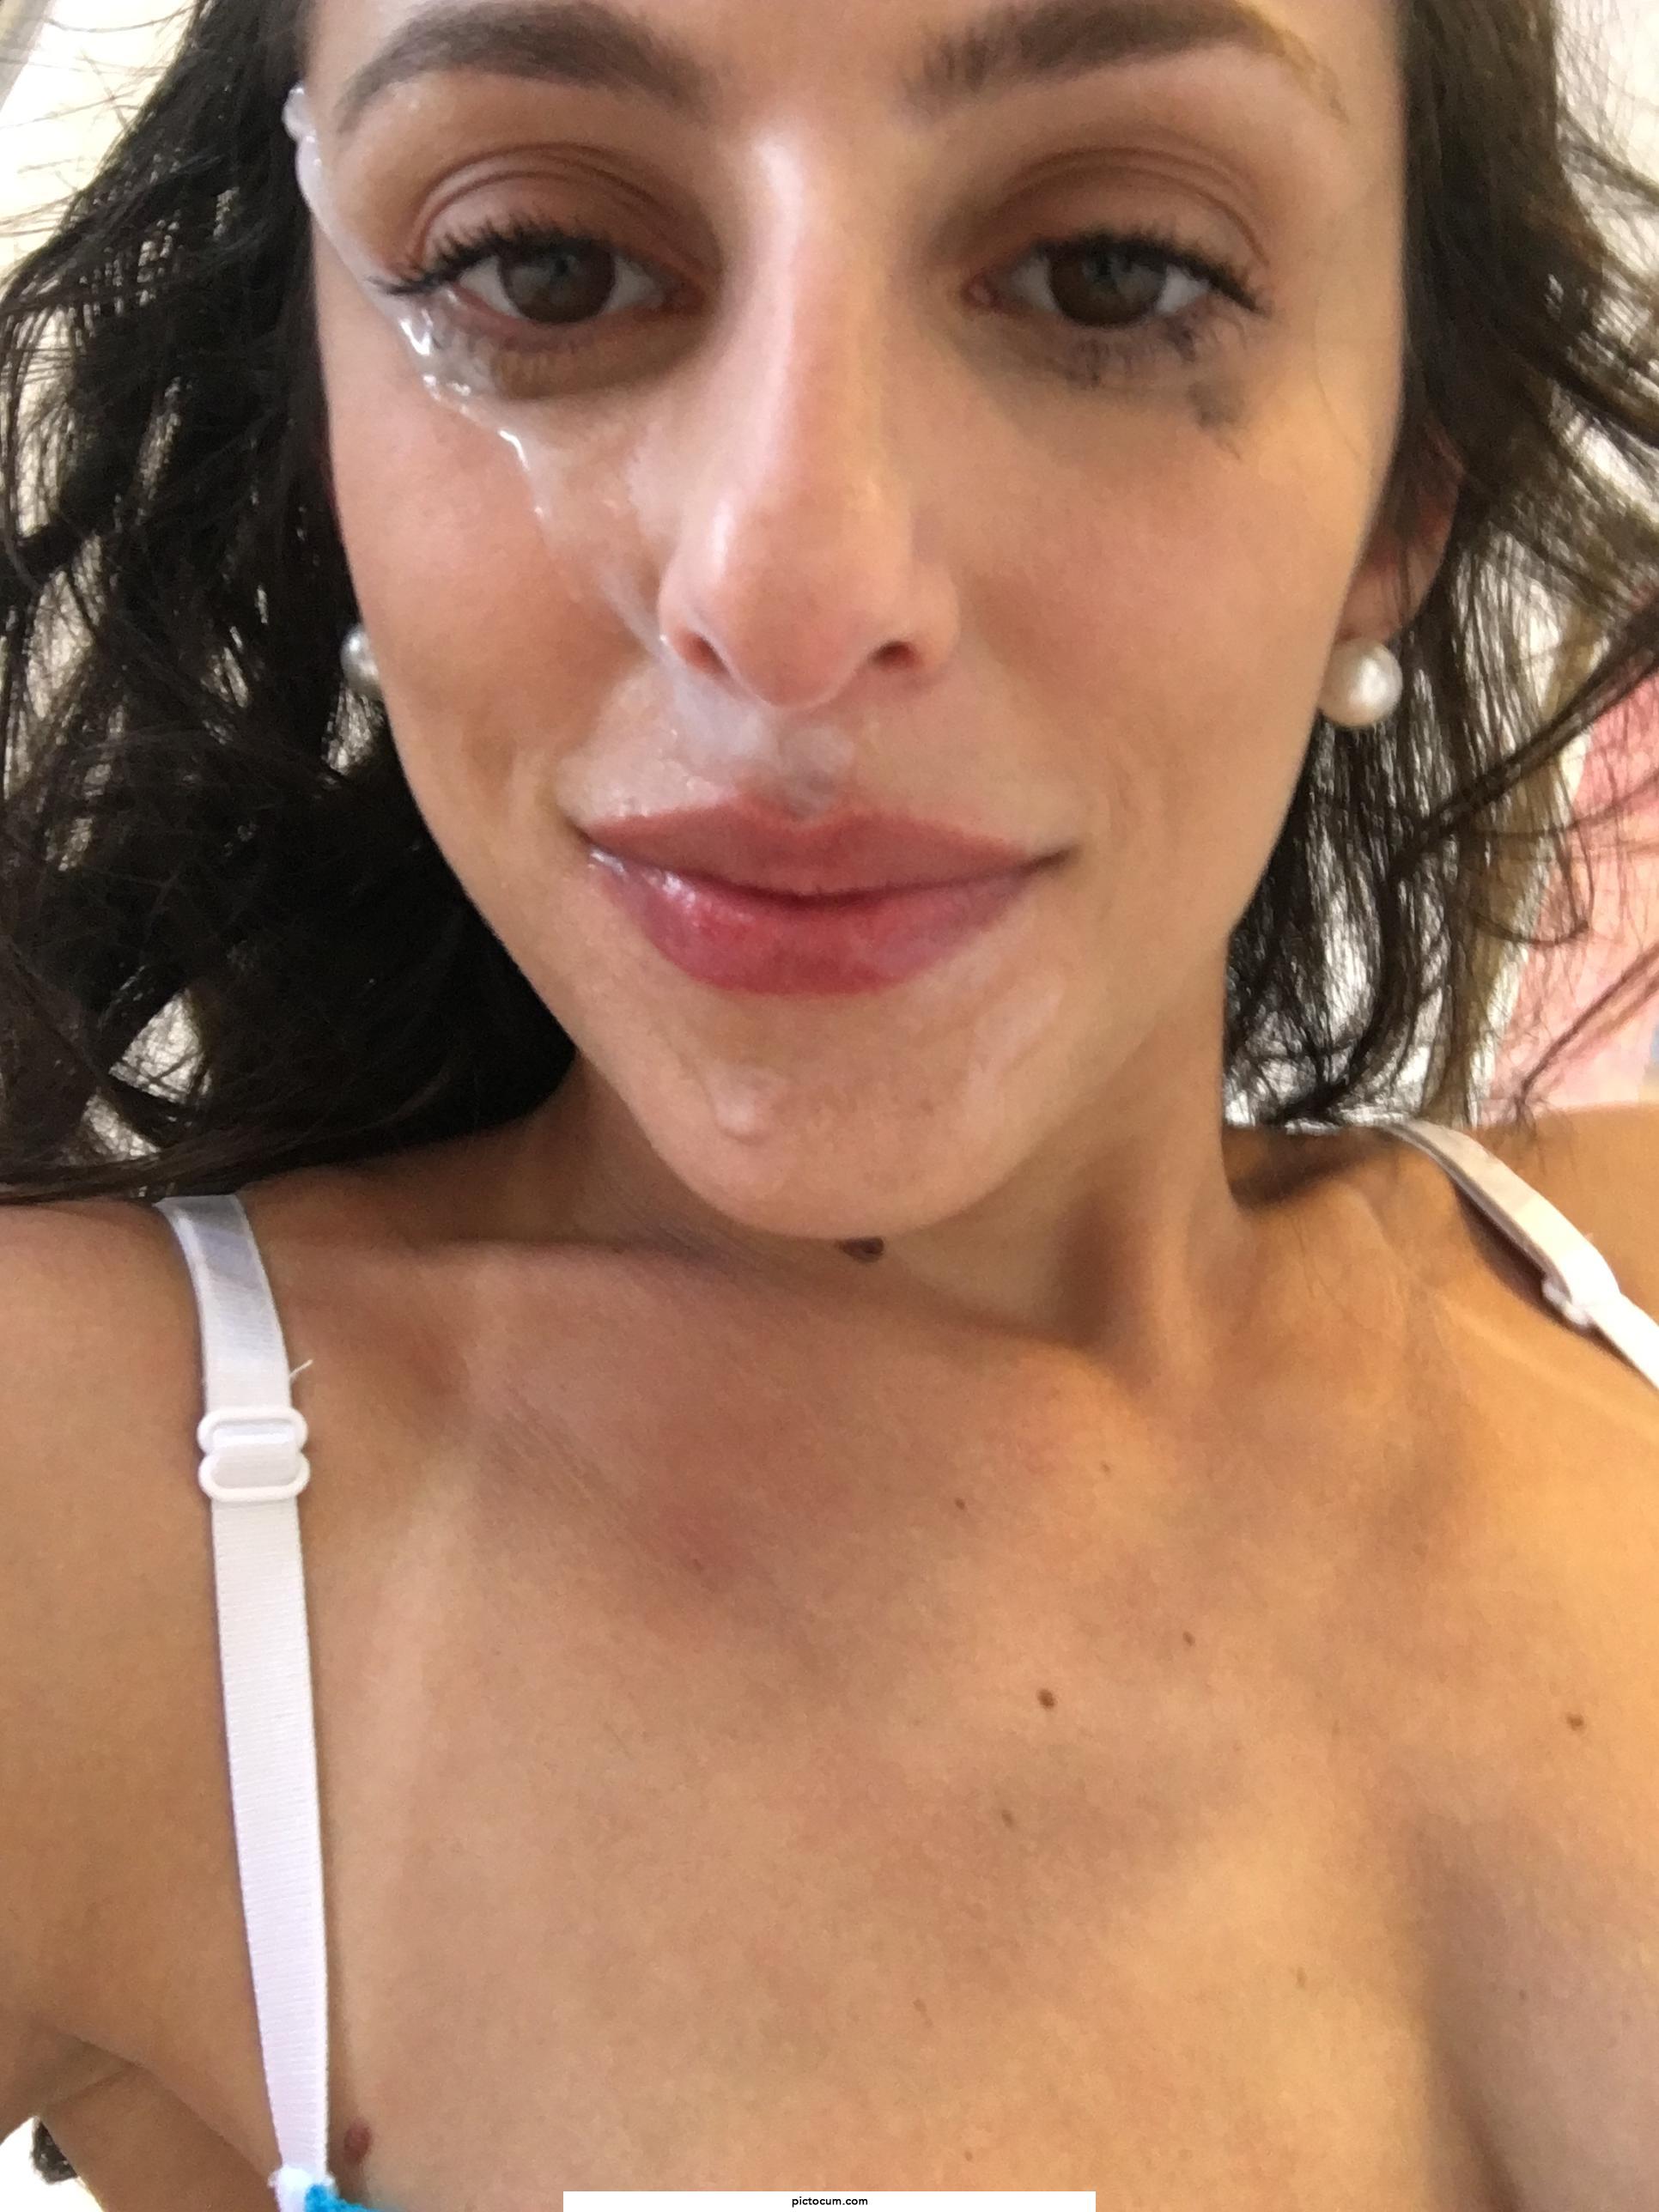 Smeared makeup means a quality blowjob